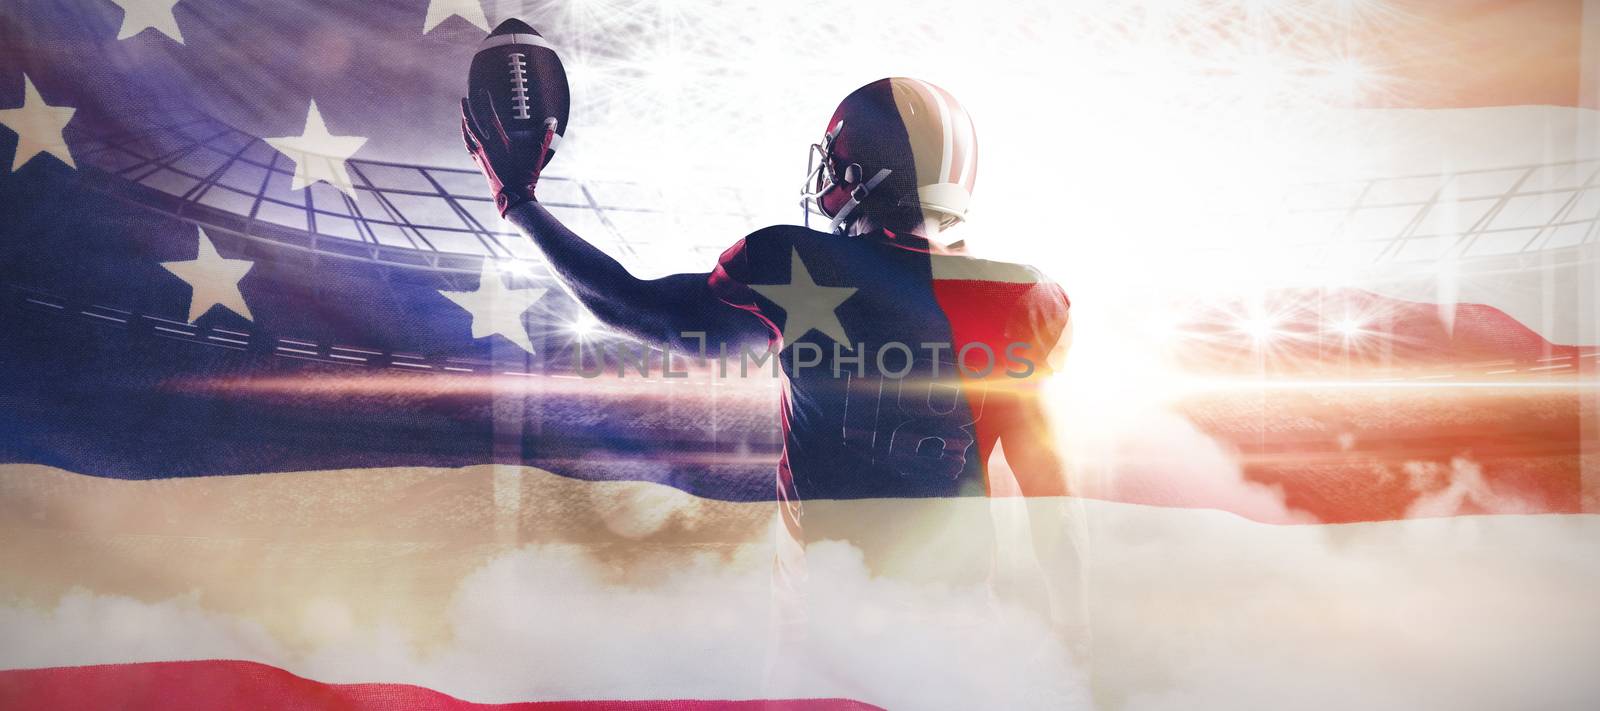 American football player in helmet holding rugby ball against close-up of an american flag